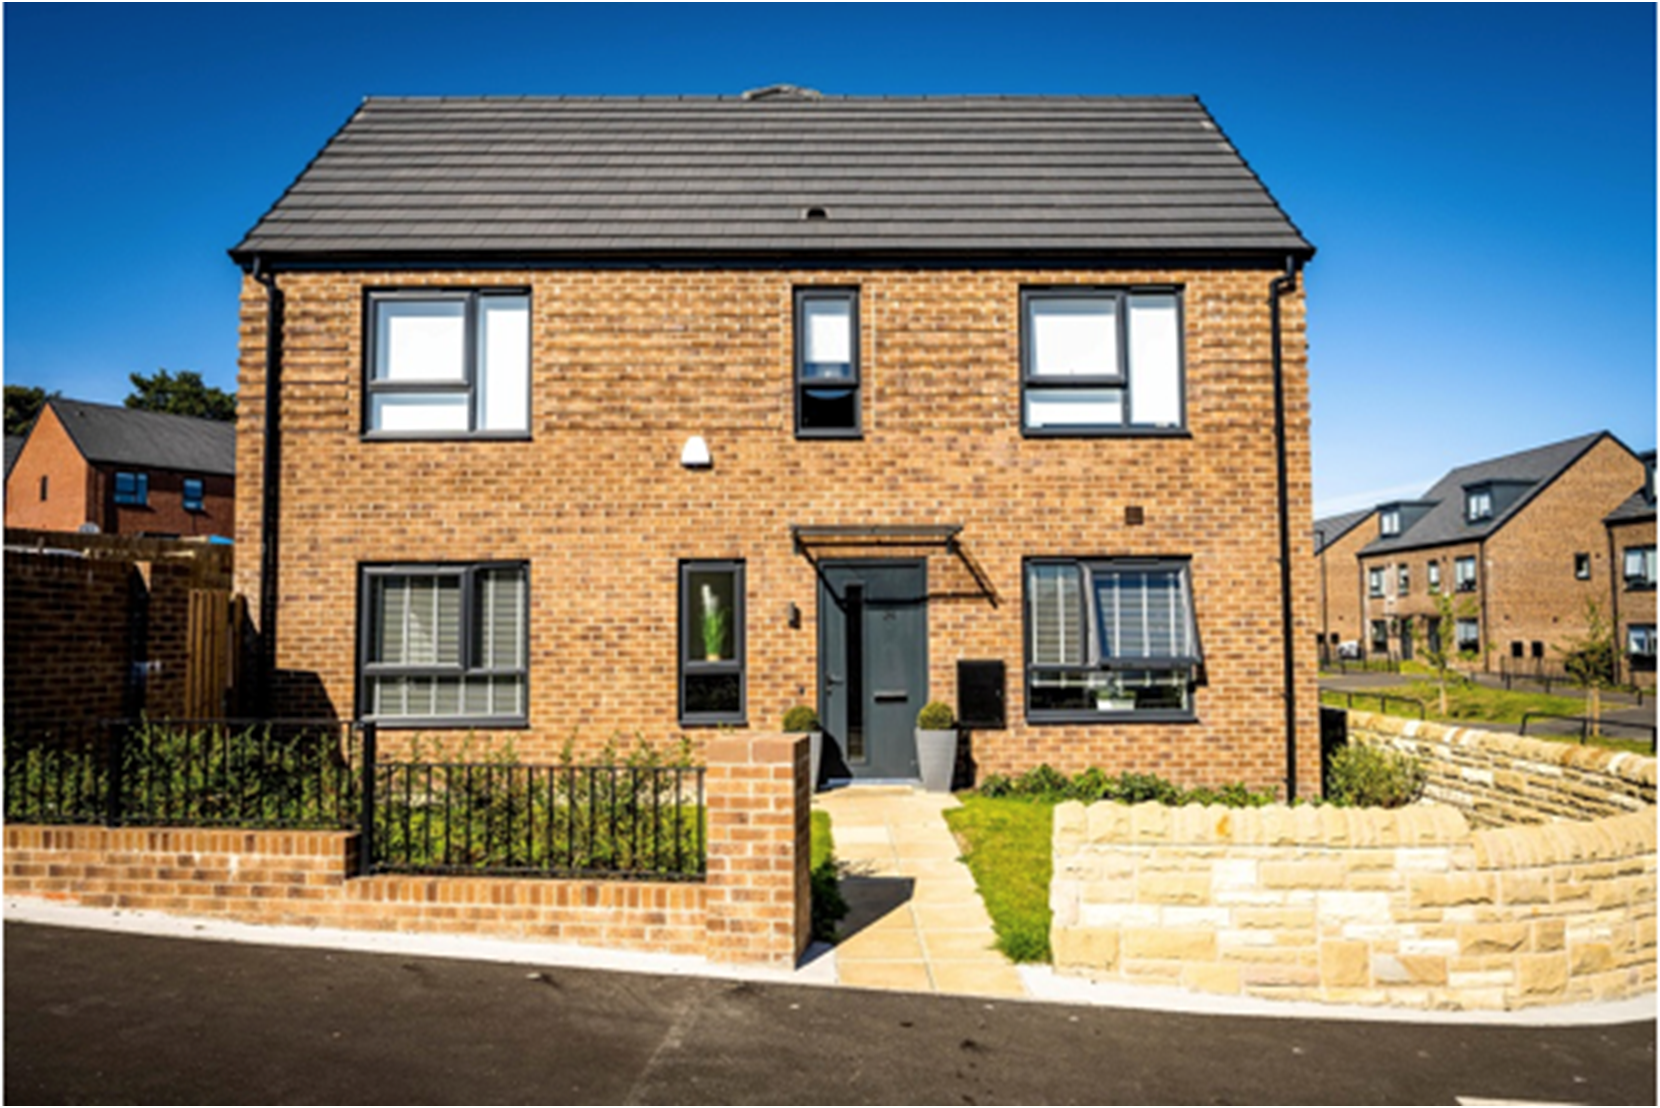 Houses to Rent by Simple Life in Princes's Gardens, Sheffield, S2, development panoramic